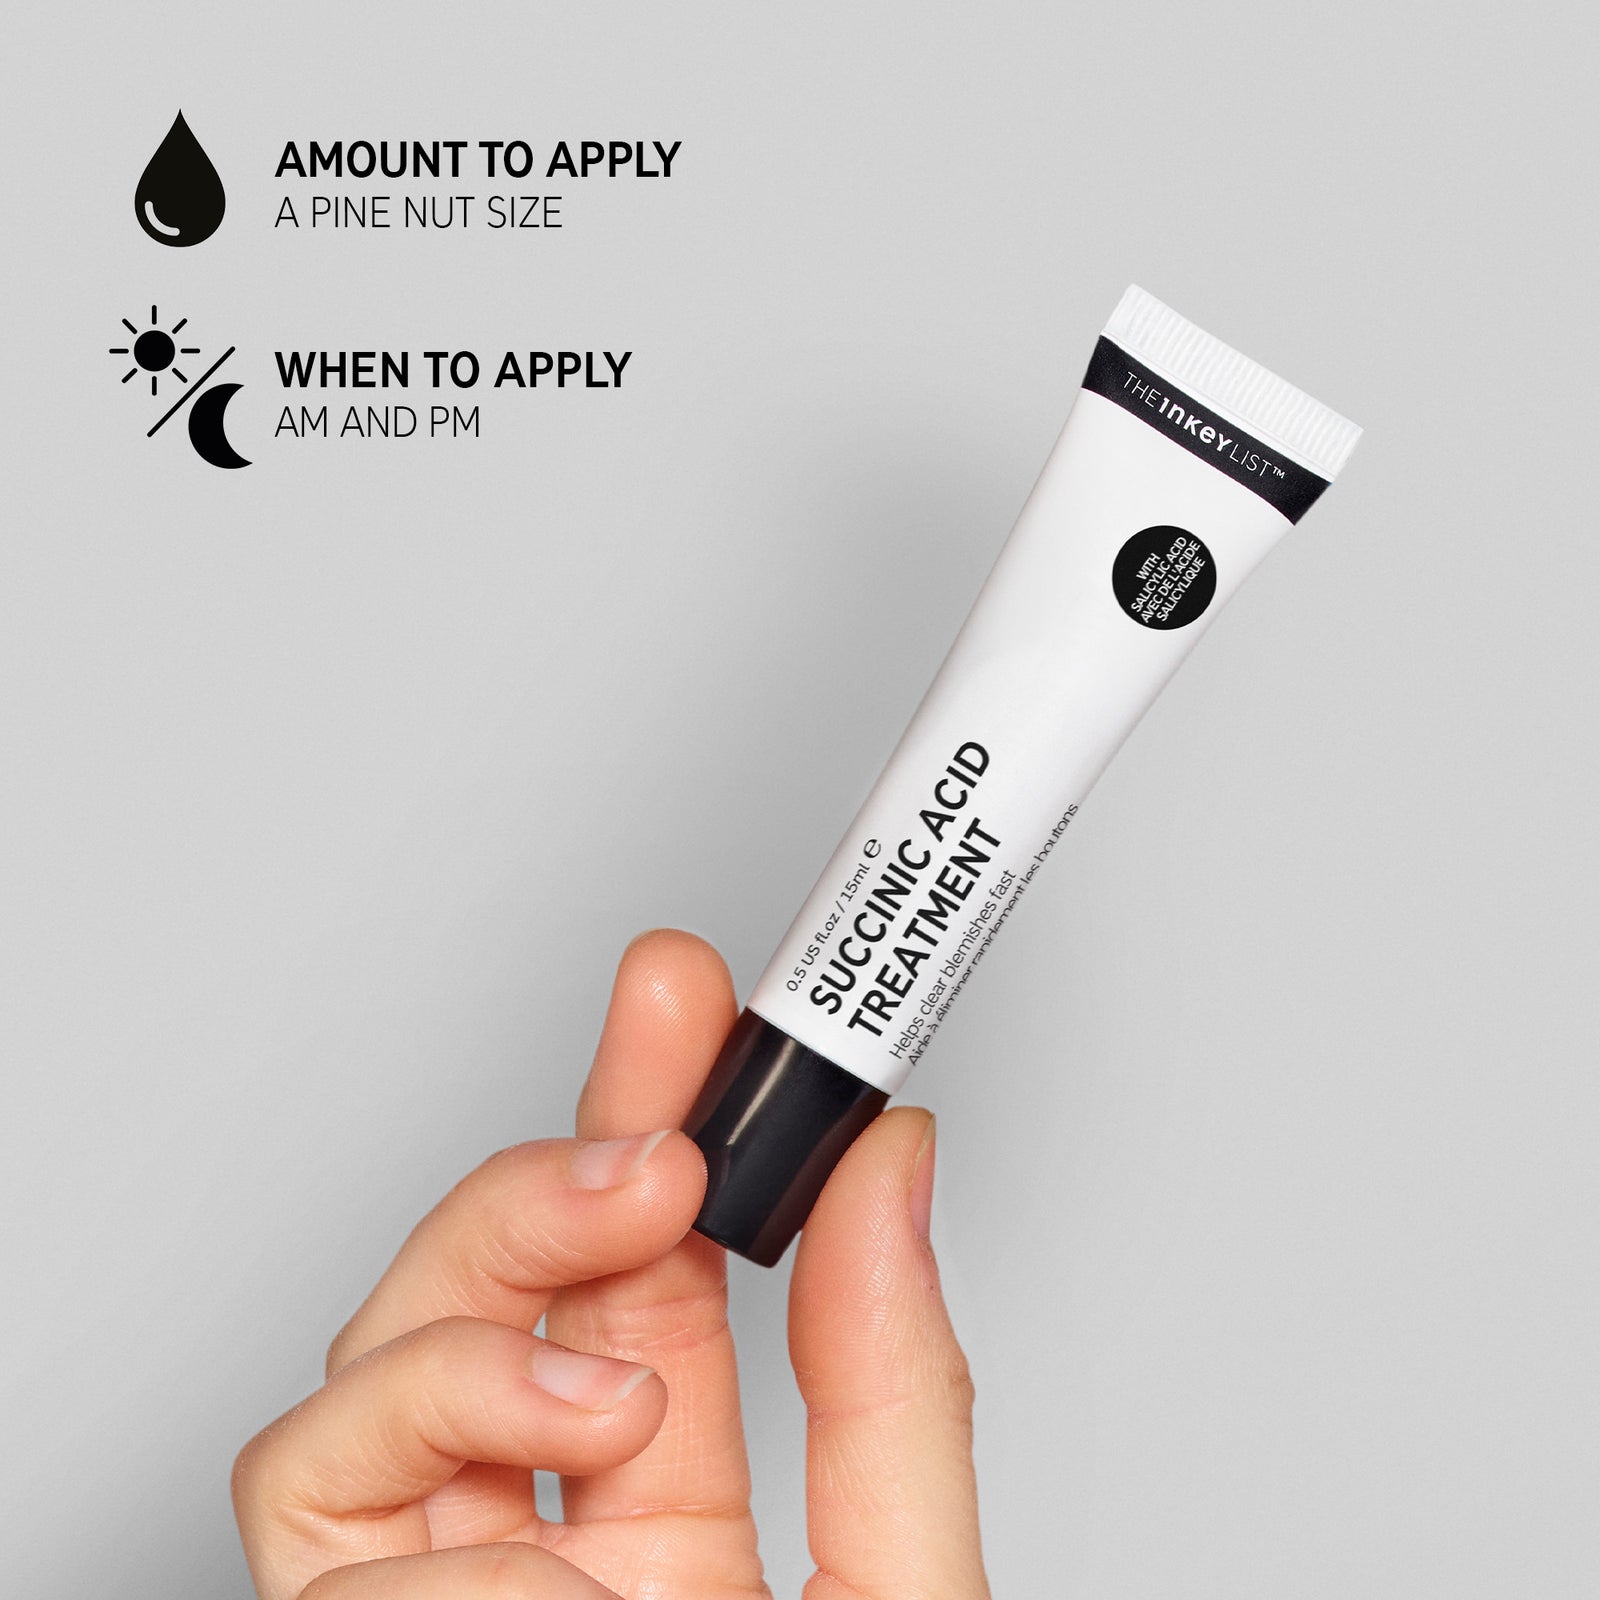 Hand holding a tube of Succinic Acid Treatment with text overlay: amount to apply (pine nut sized) and when to apply (AM and PM)